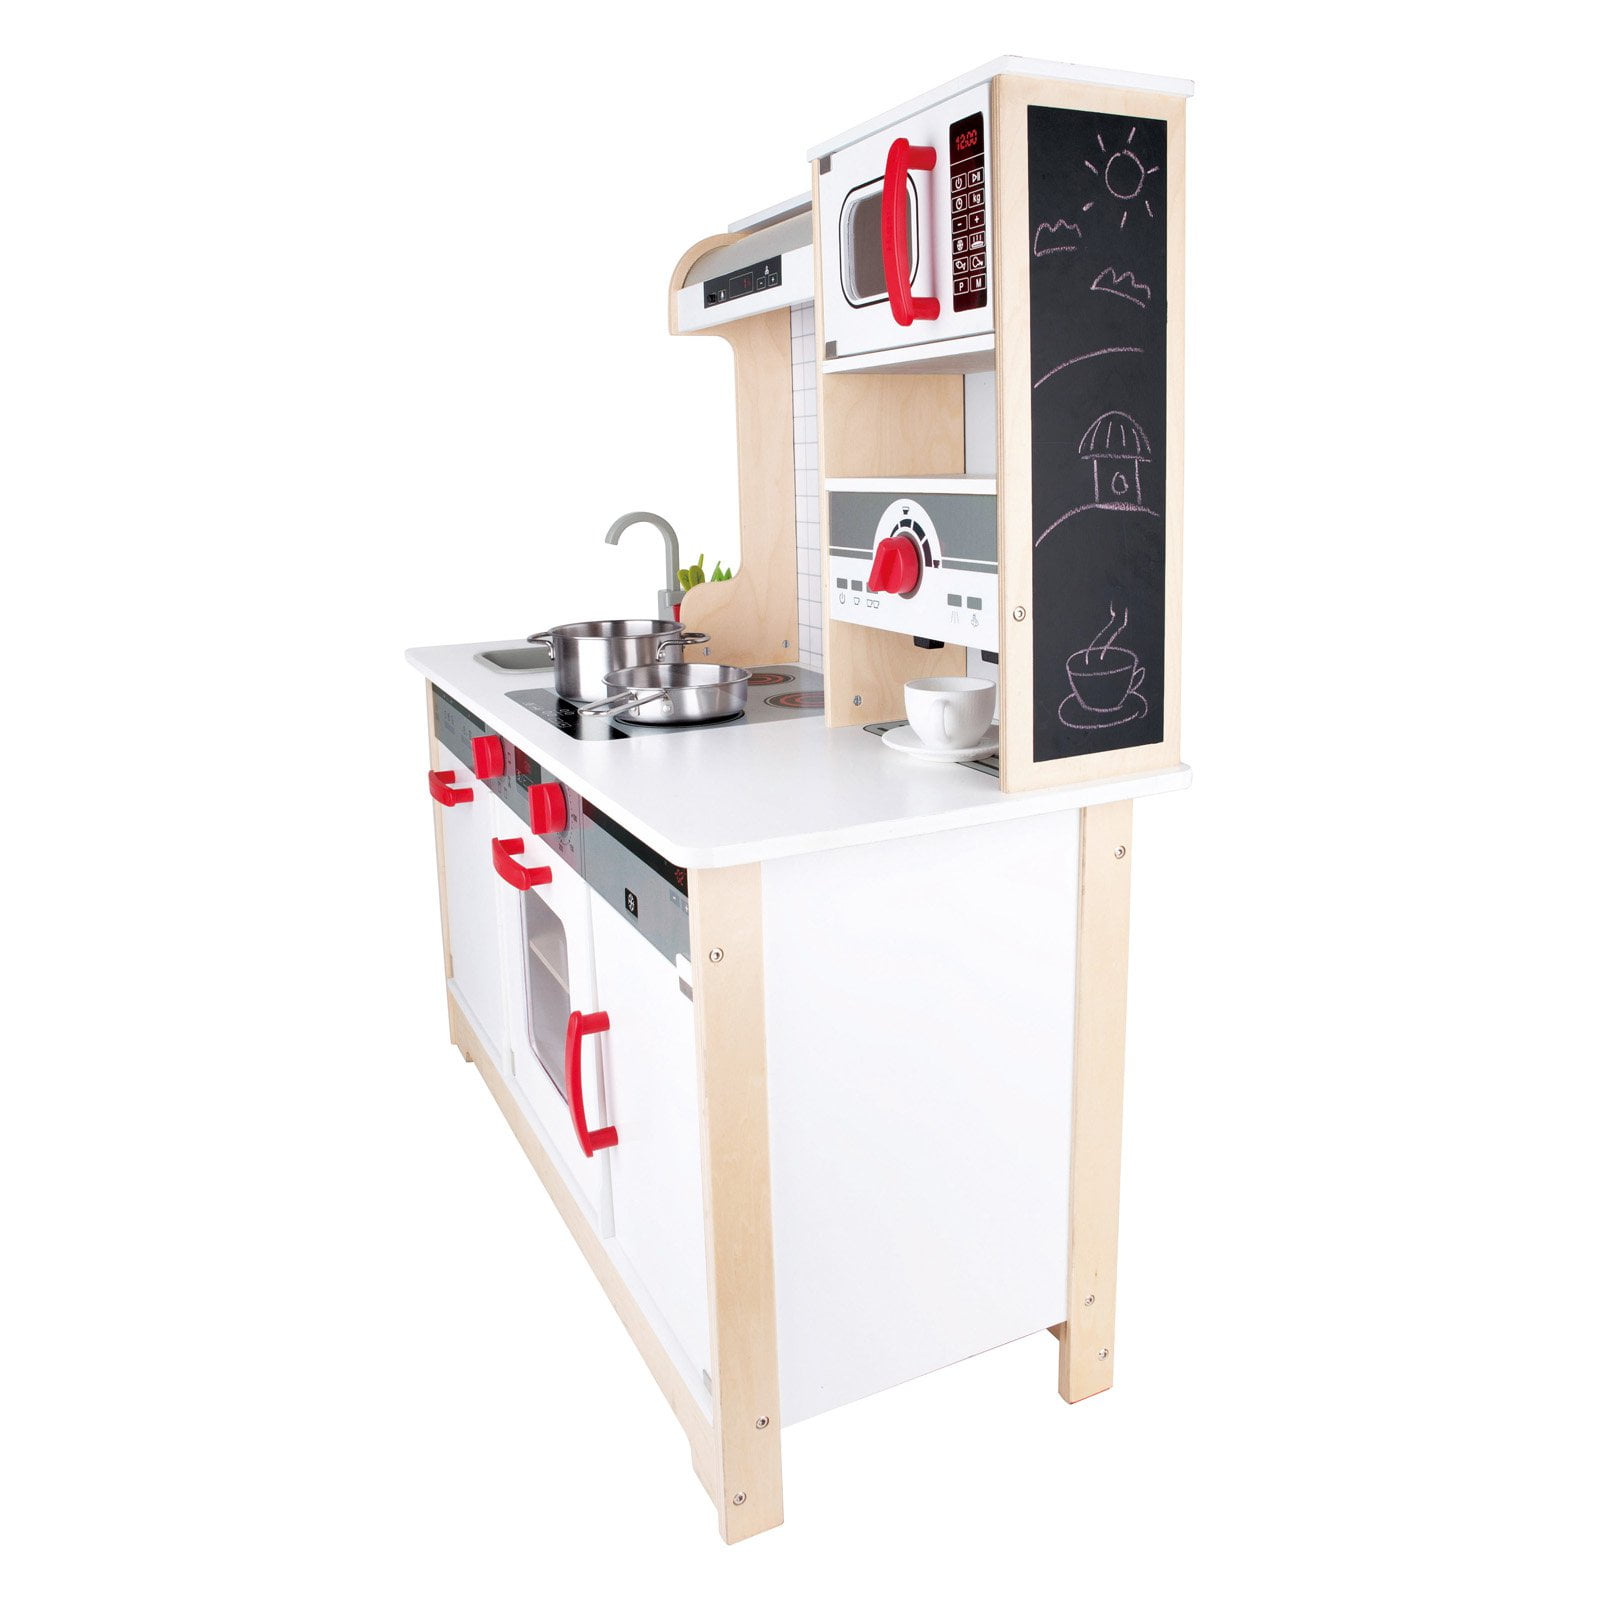 Hape Kids All-in-1 Wooden Play Kitchen with Accessories 